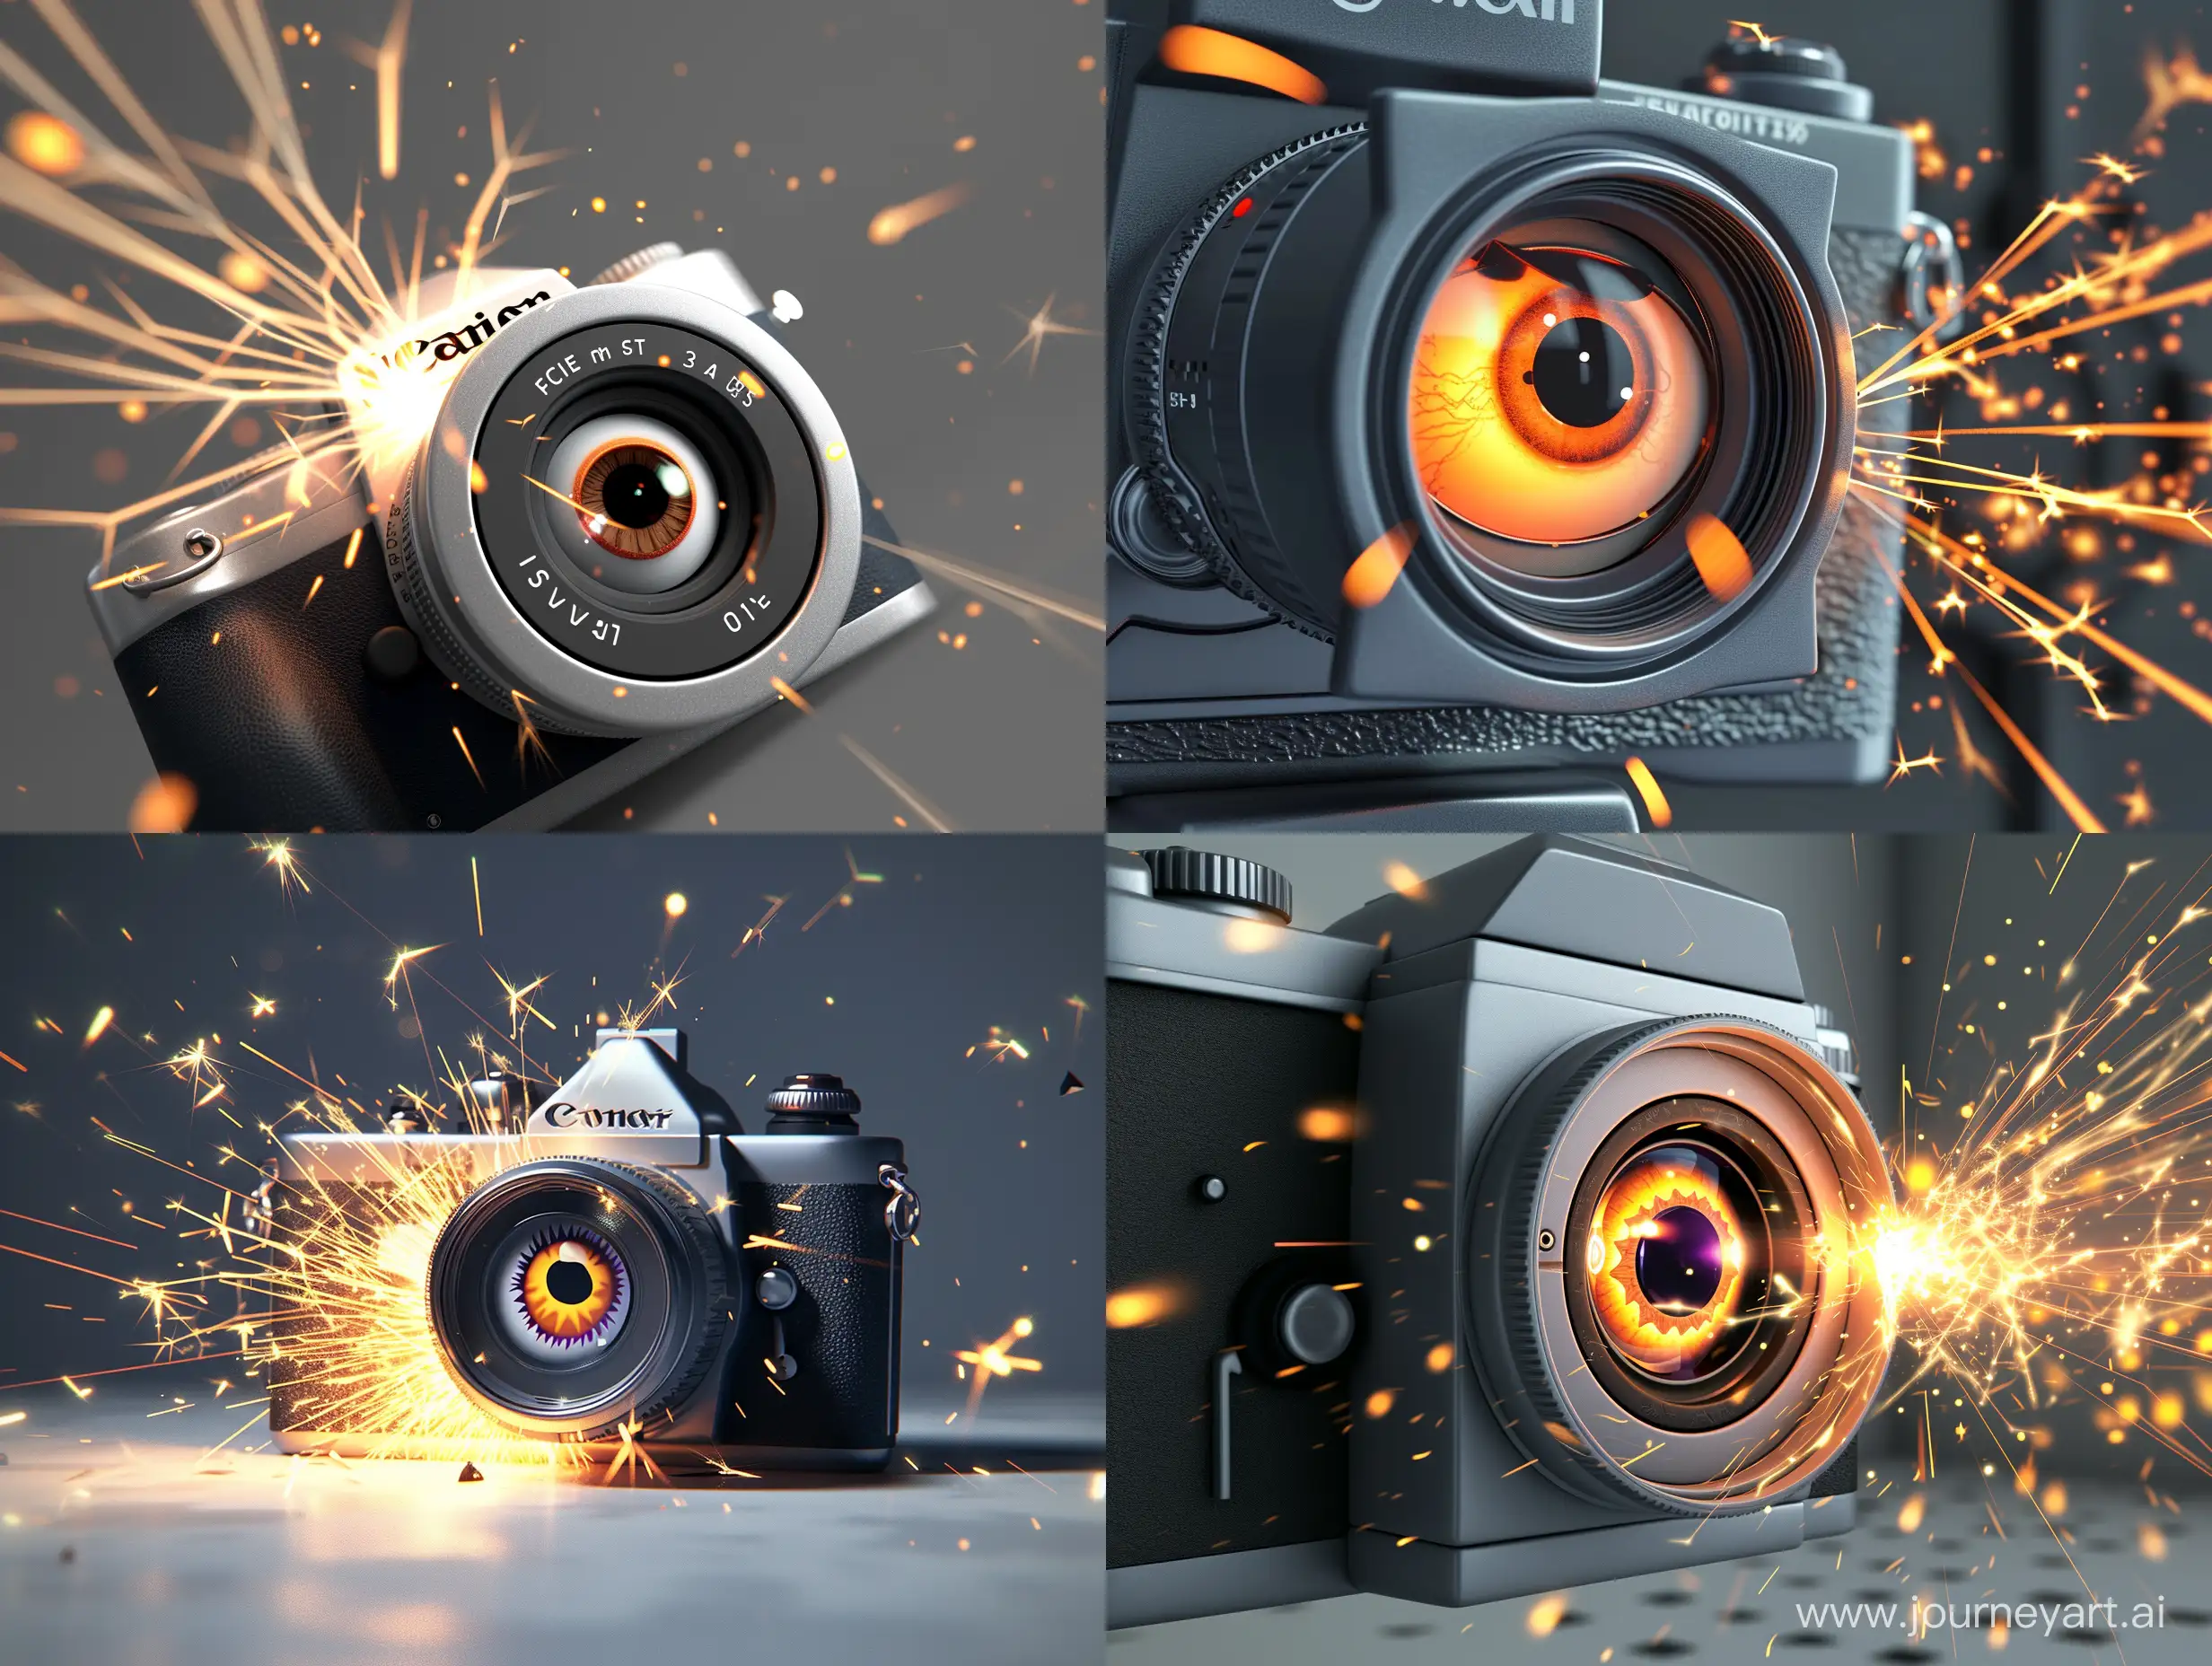 a camera in which you can see a cartoon eye in the lens and it's very cute. and little sparks fly out of the button. text click u.  style - 3d realictic